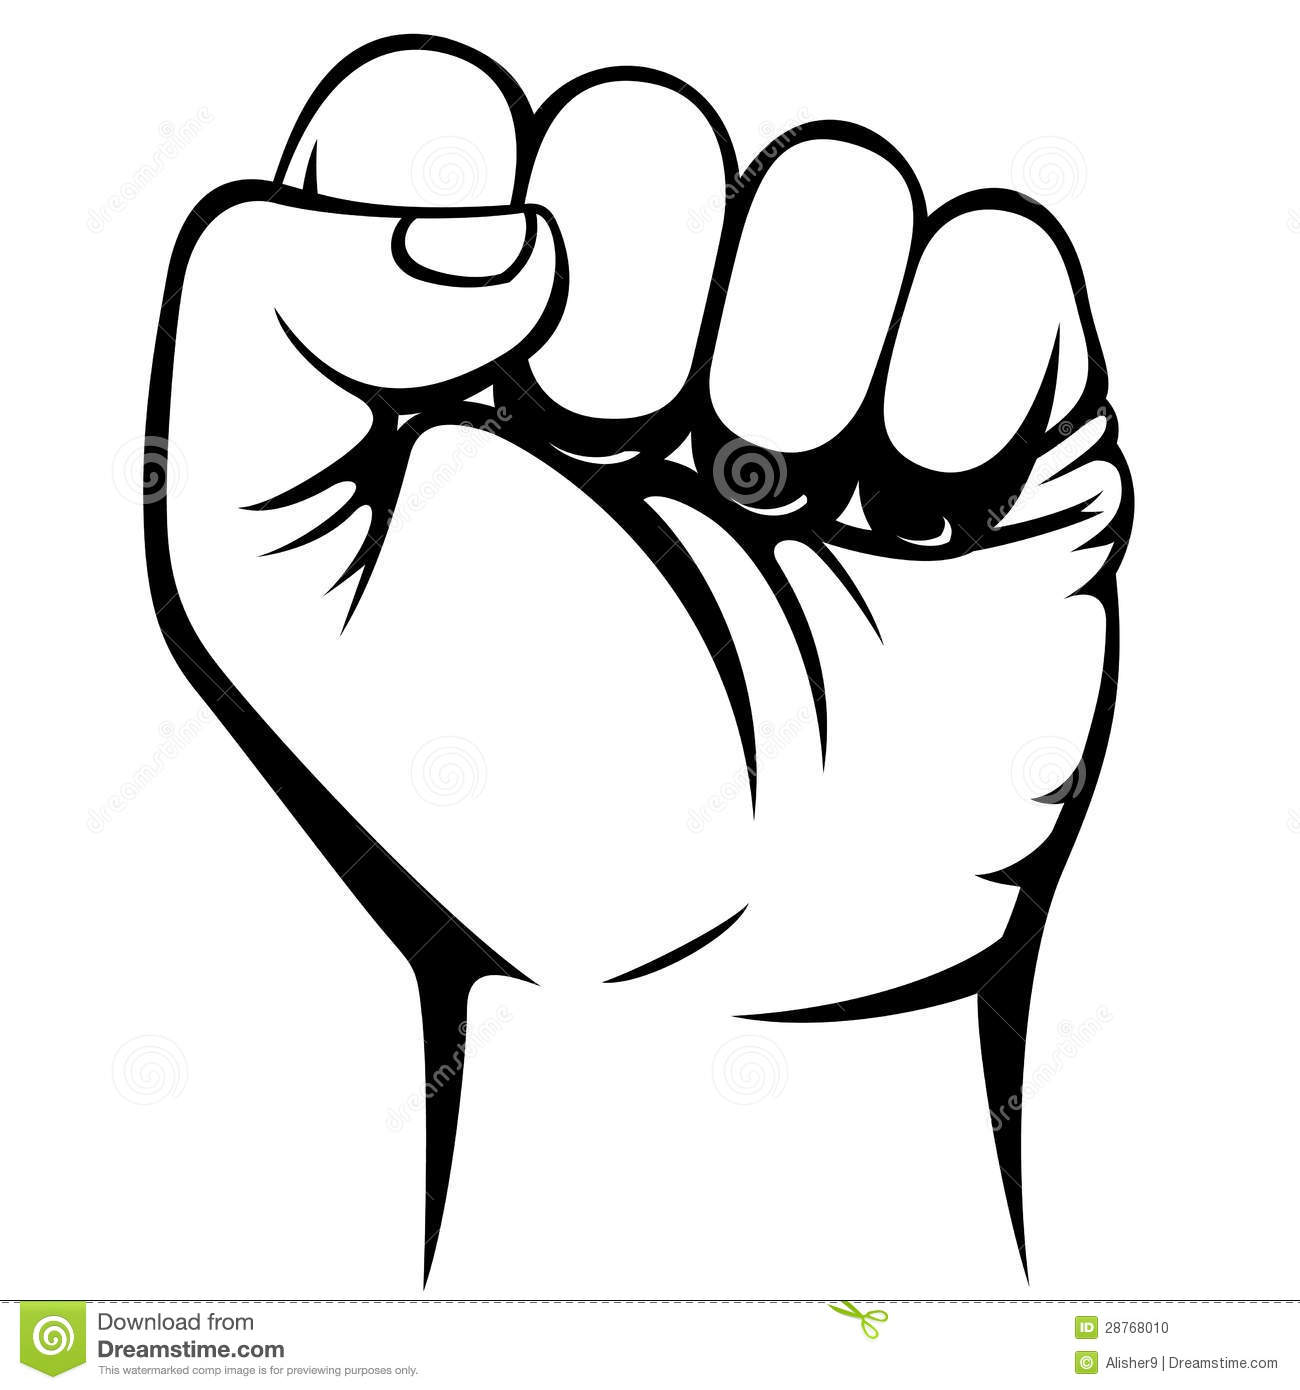 Male Clenched Fist Stock Photo   Image  28768010